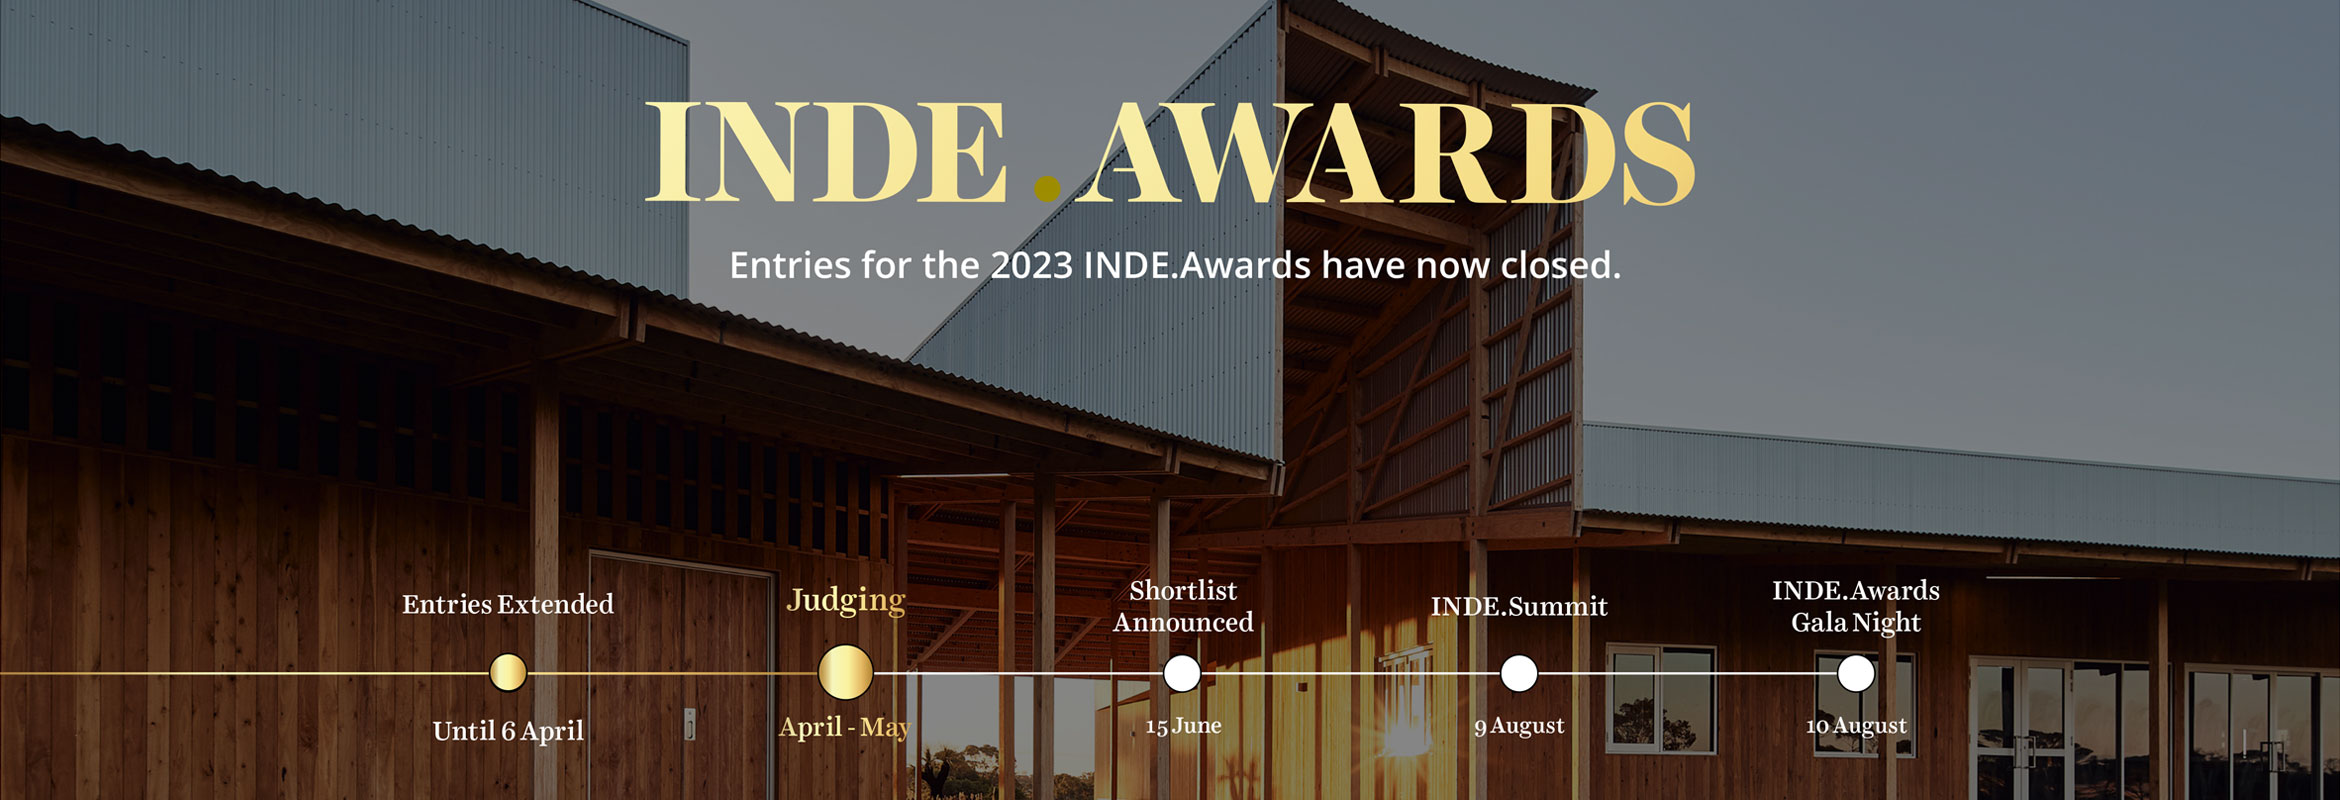 Entries for the 2023 INDE.Awards have now closed.